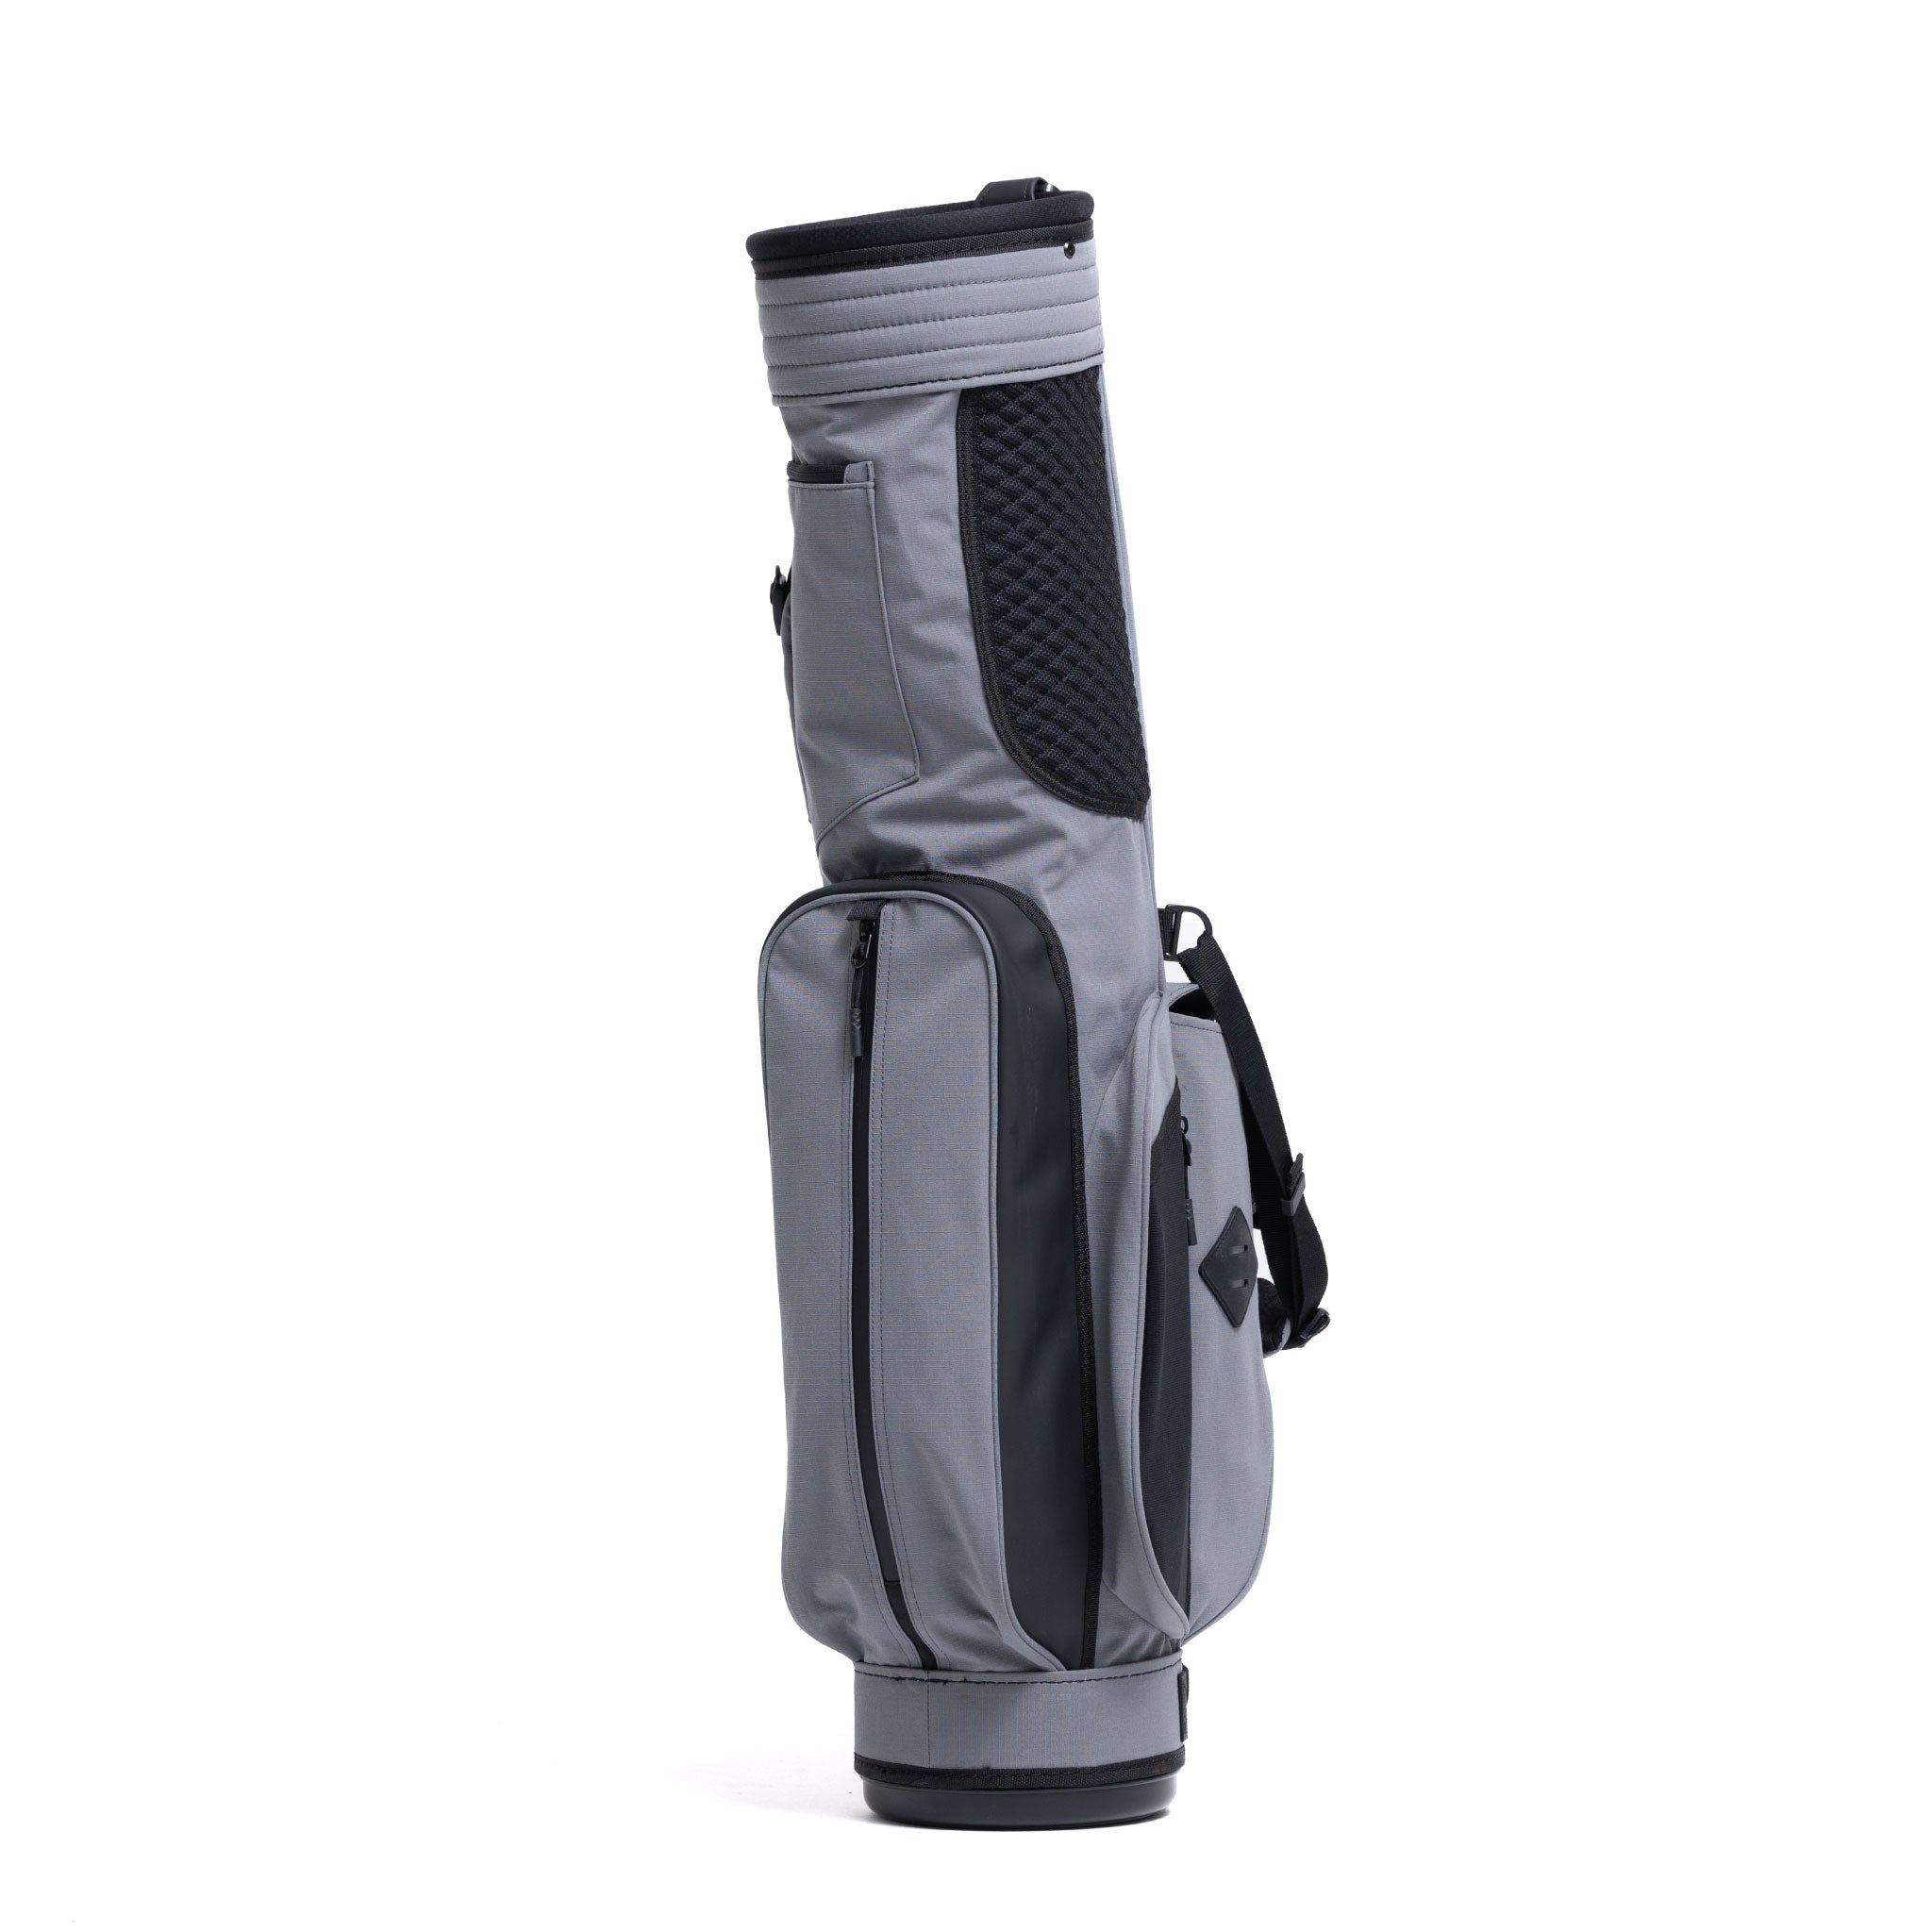 Jones Sports Co. Rover Carry Bag - Charcoal